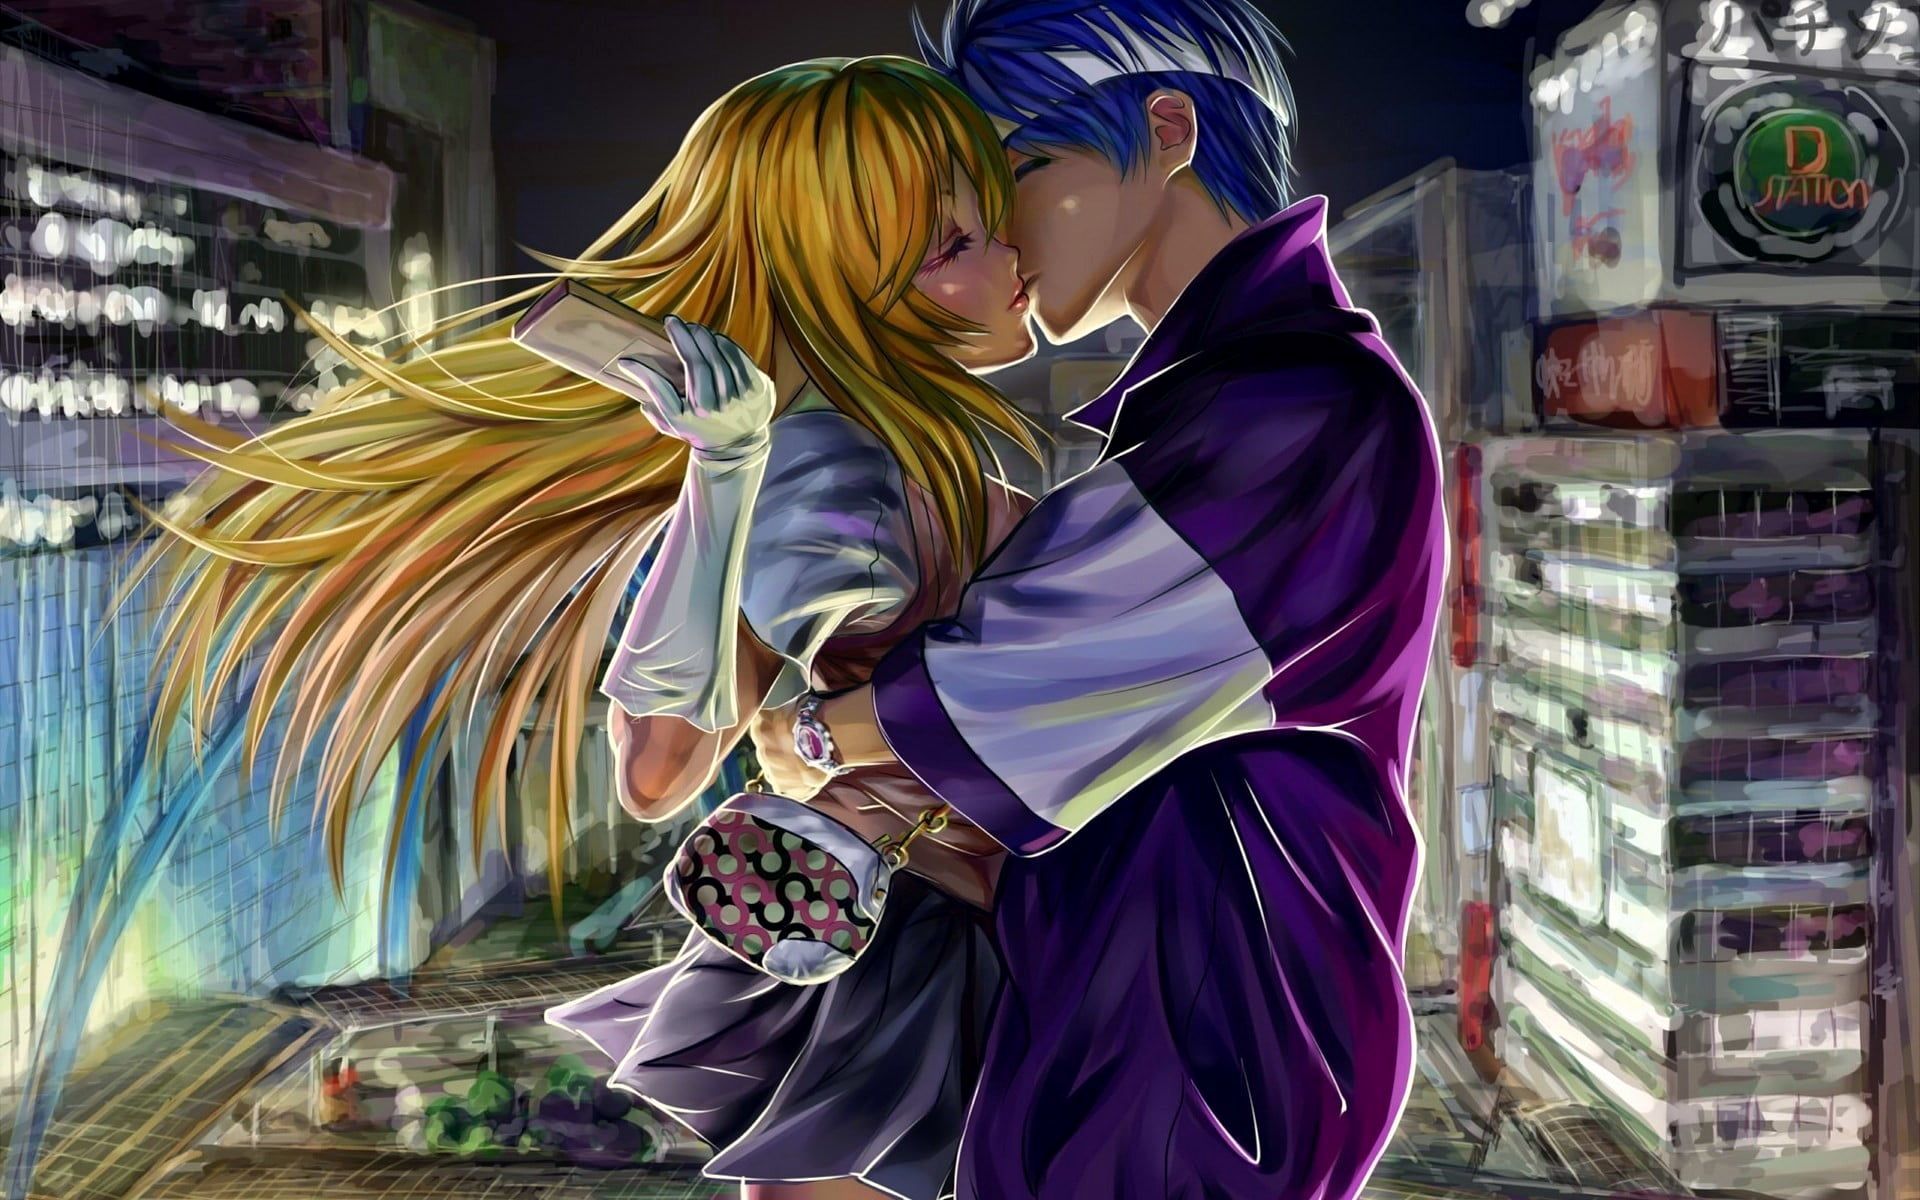 Kissing Background Awesome Kiss Anime Wallpaper